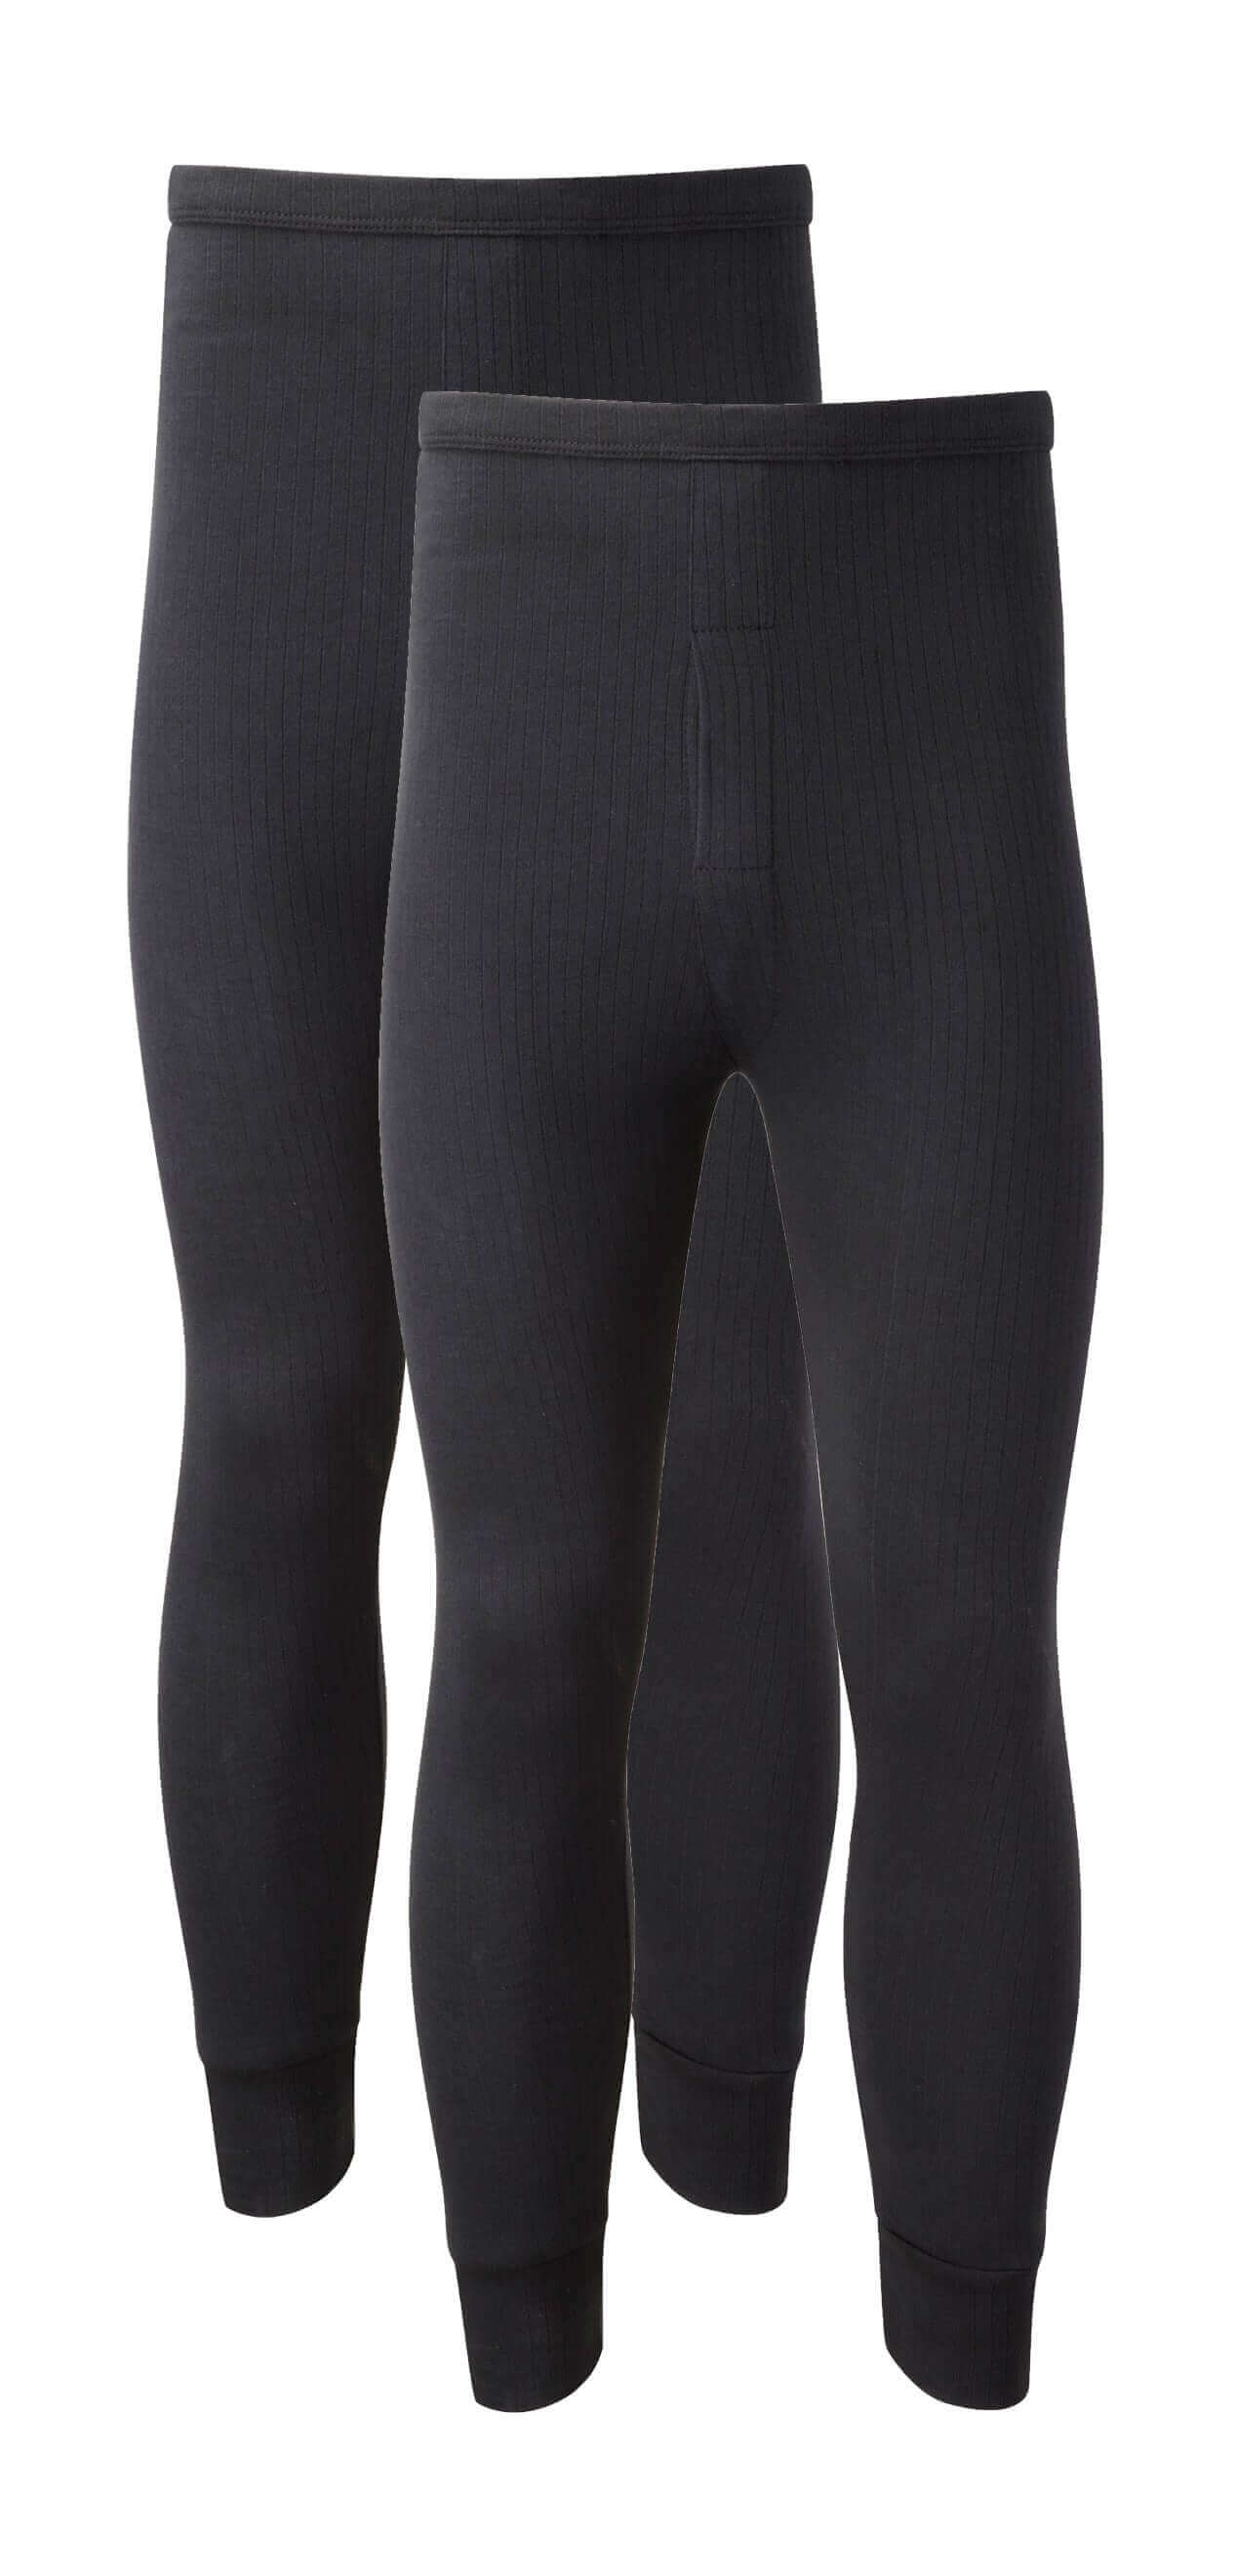 Heatwave® Pack Of 2 Men's Thermal Trousers Long Johns, Warm Underwear Set.  Buy Now For £10.00.